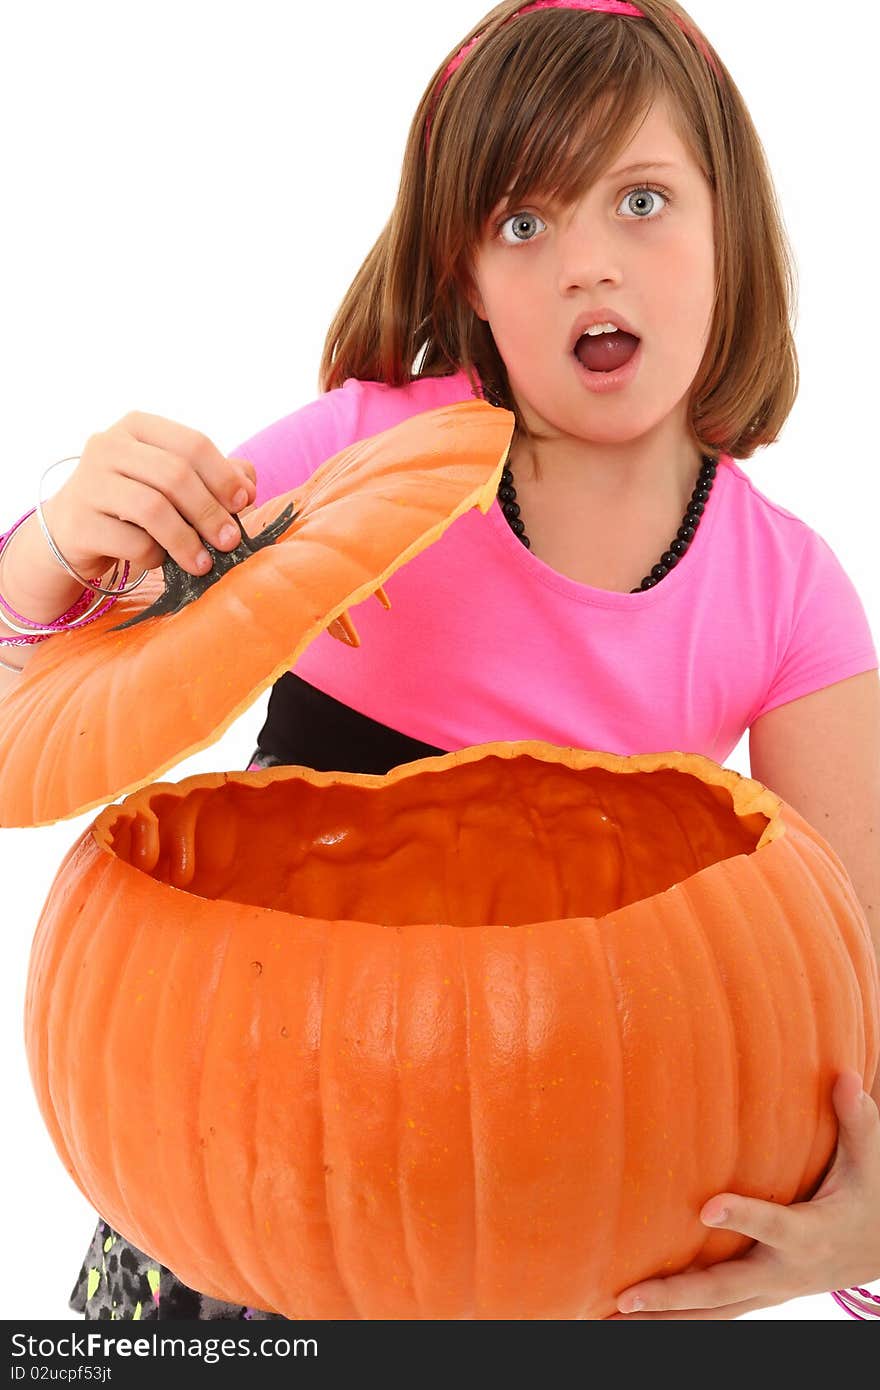 Beautiful 10 year old girl with giant empty pumpkin and surprised expression over white background. Beautiful 10 year old girl with giant empty pumpkin and surprised expression over white background.